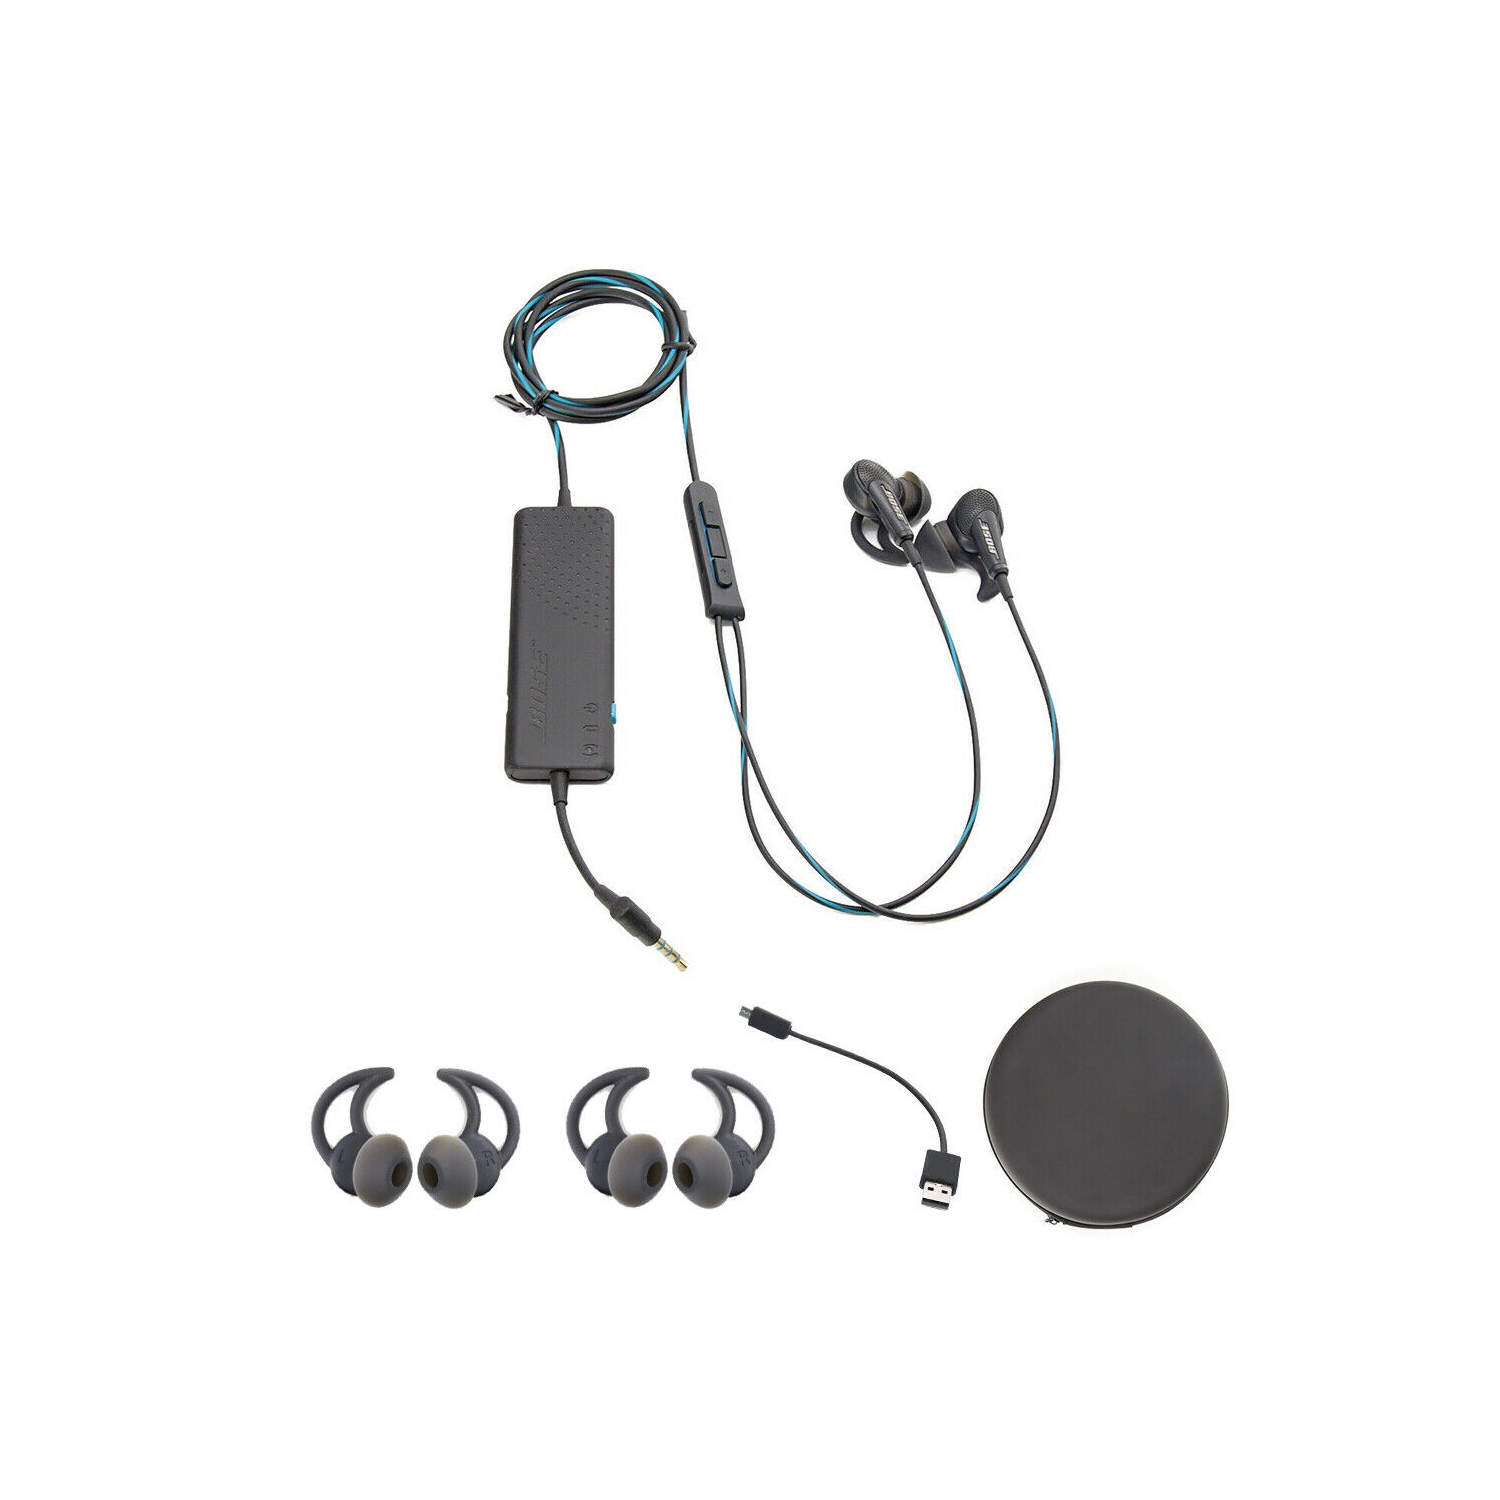 Refurbished (Good) - Bose QuietComfort 20 Acoustic Noise Cancelling Headphones In-Ear Headsets- Black